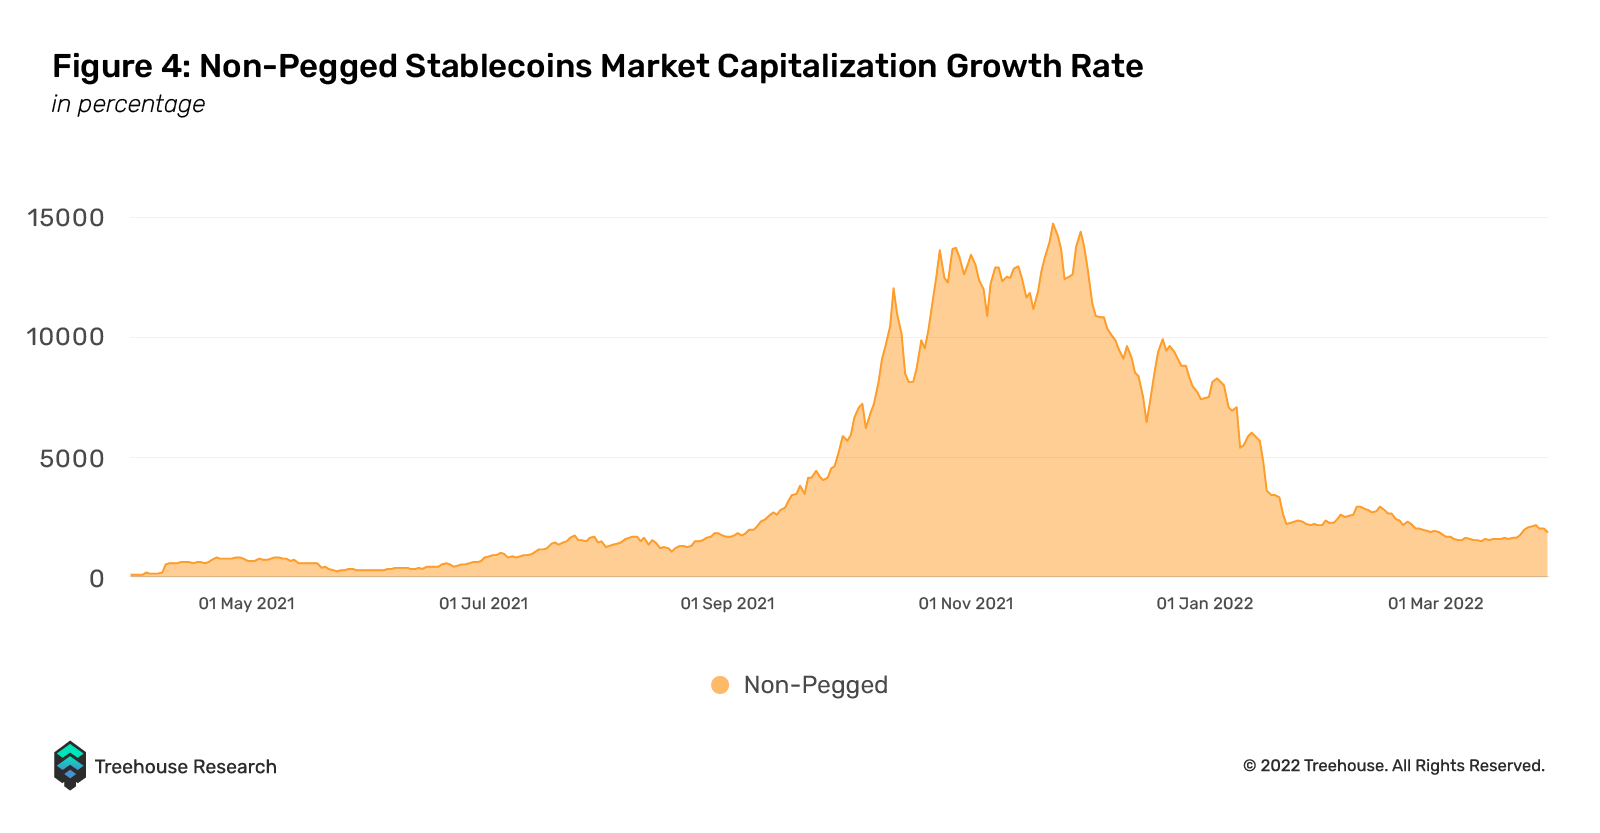 non-pegged stablecoins market capitalization growth rate